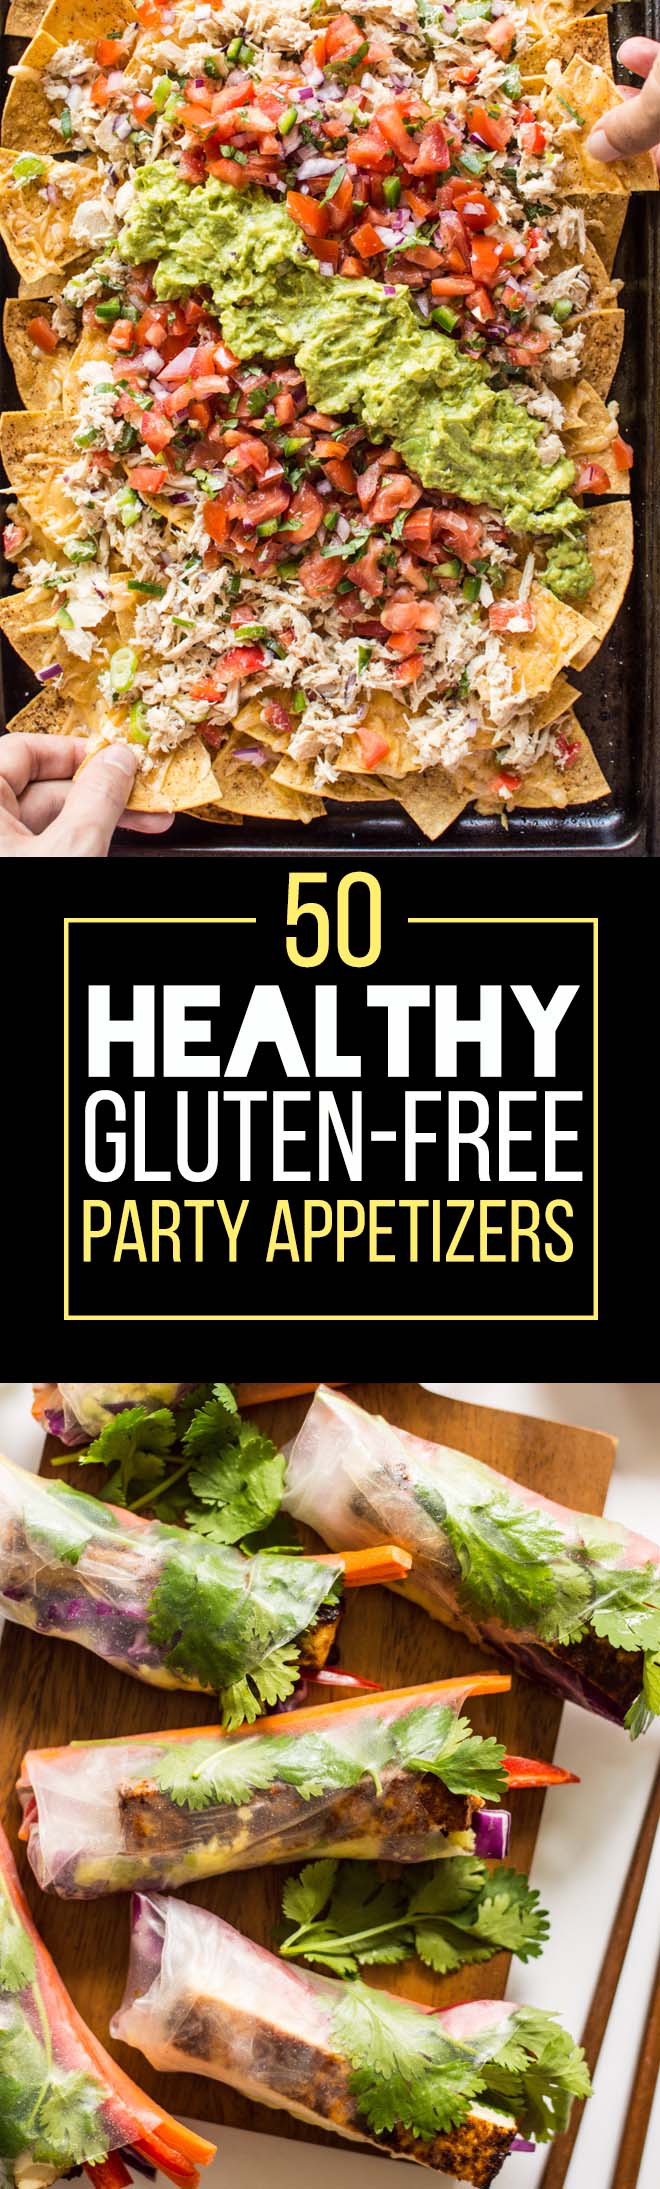 50 Healthy Gluten-Free Appetizers - delicious bites that are perfect for game day or your next party! | clube.futebolmilionario.com